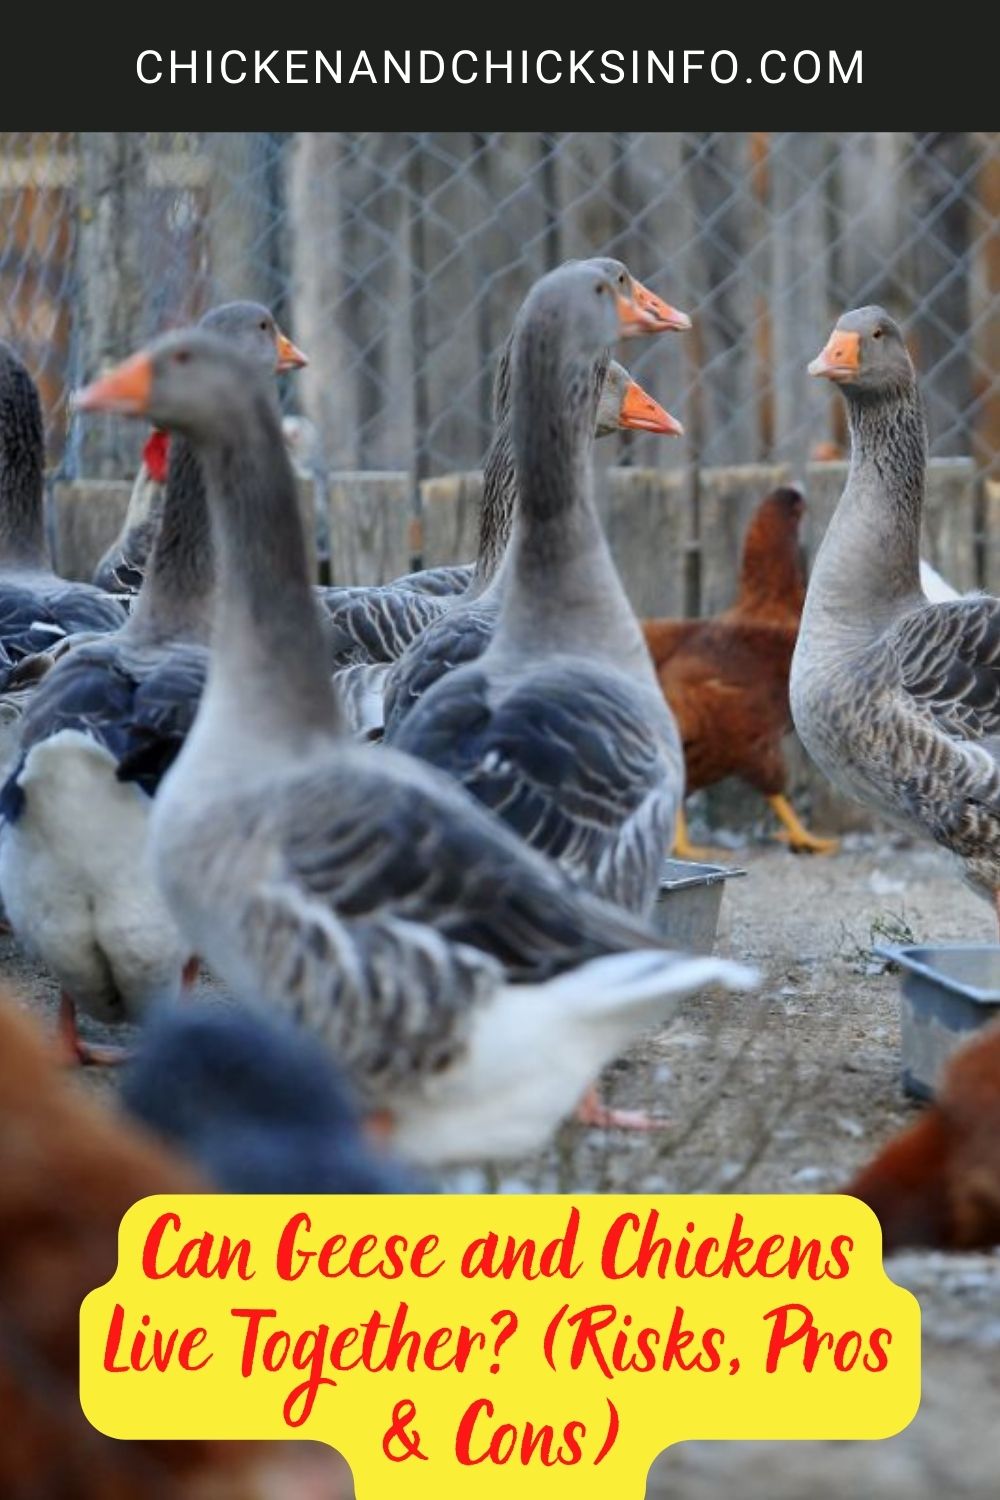 Can Geese and Chickens Live Together? (Risks, Pros & Cons) poster.
